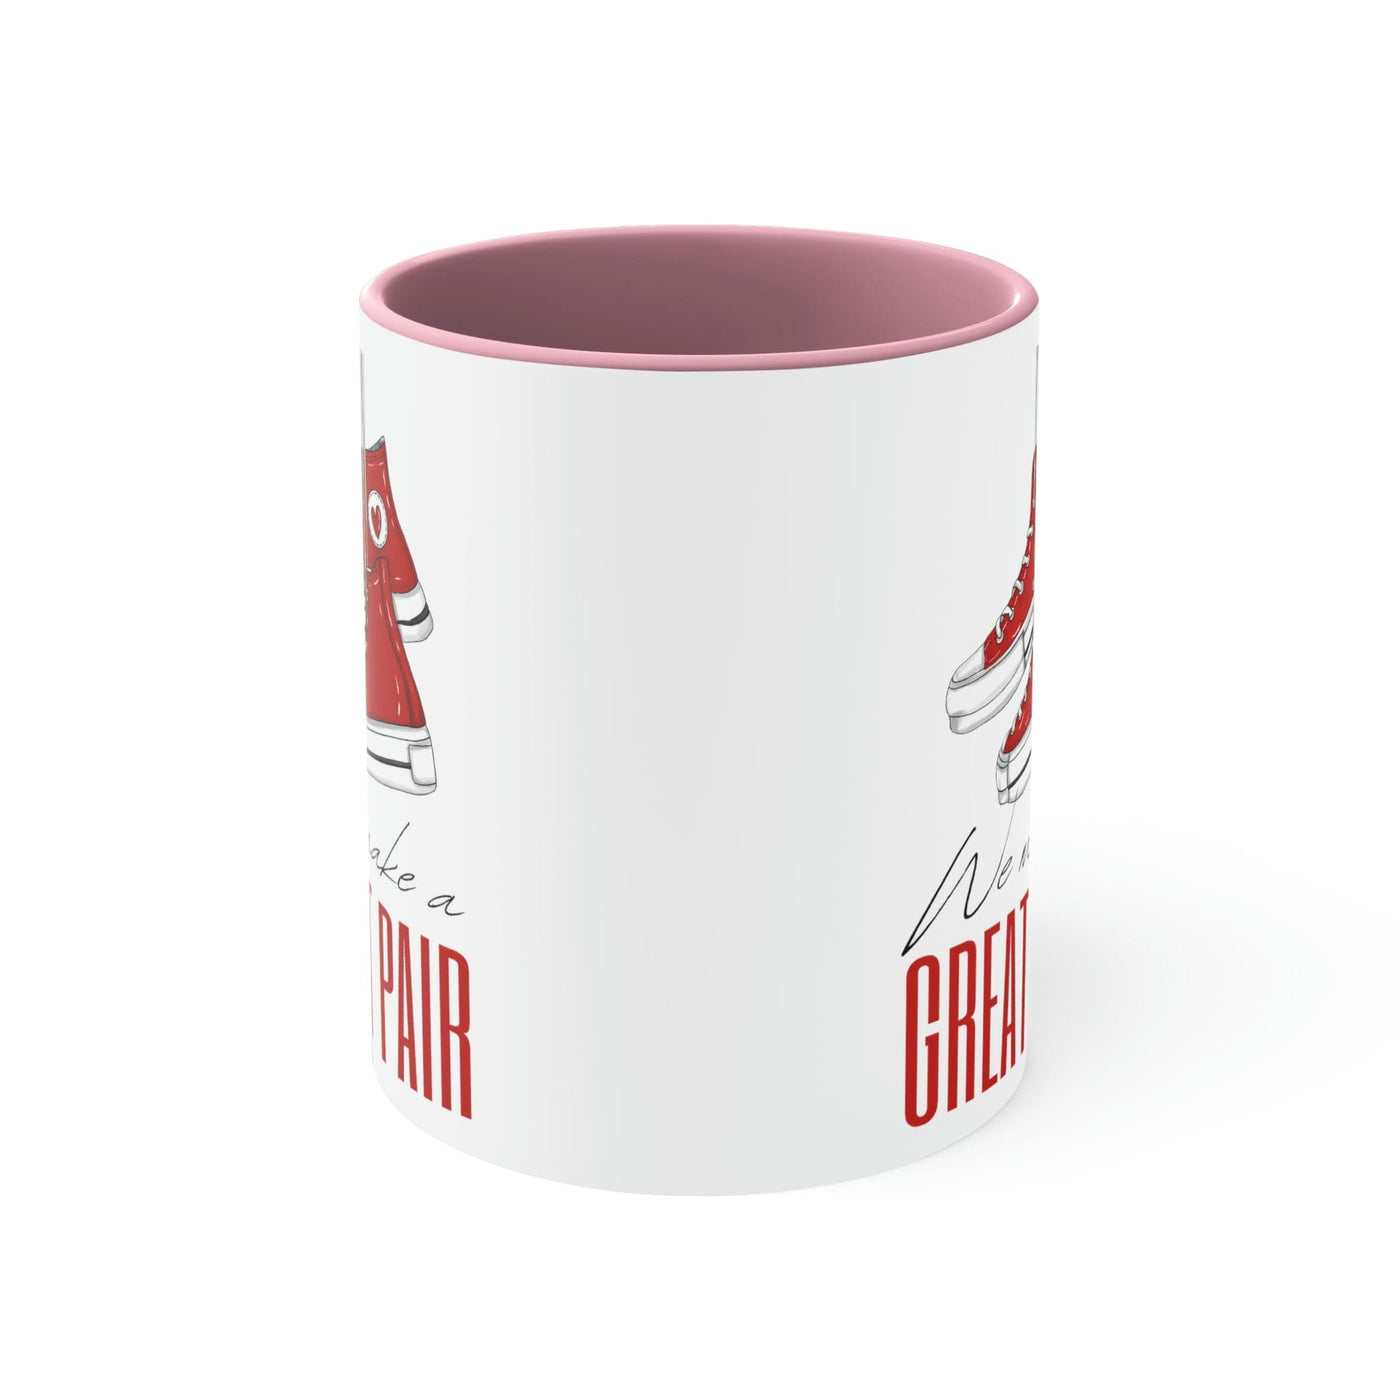 Two-tone Accent Ceramic Mug 11oz Say It Soul We Make a Great Pair Red